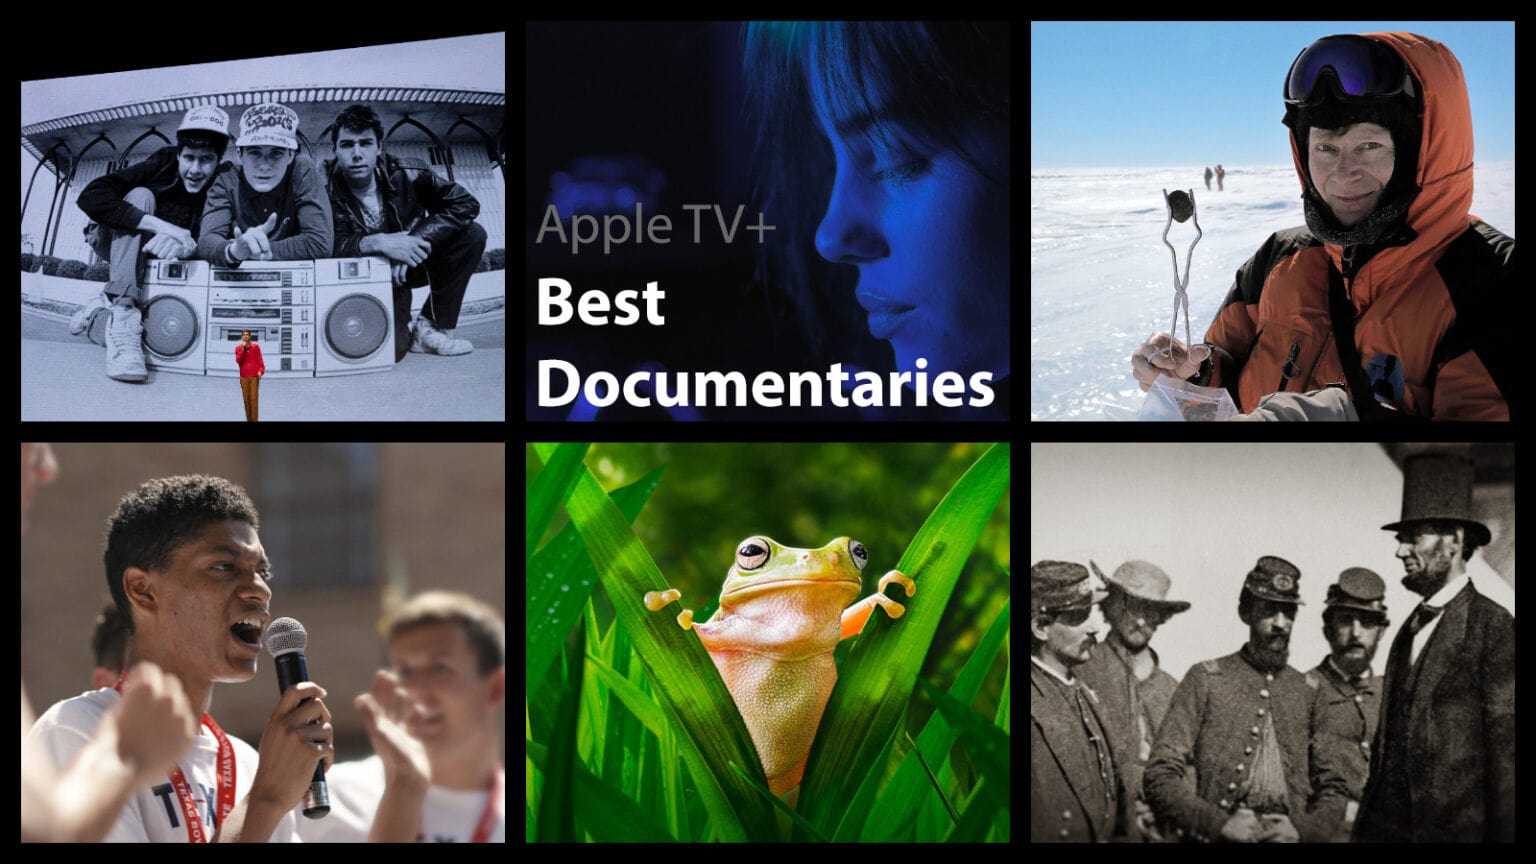 Apple TV+ best documentaries collage, with photos from six Apple TV+ documentaries.